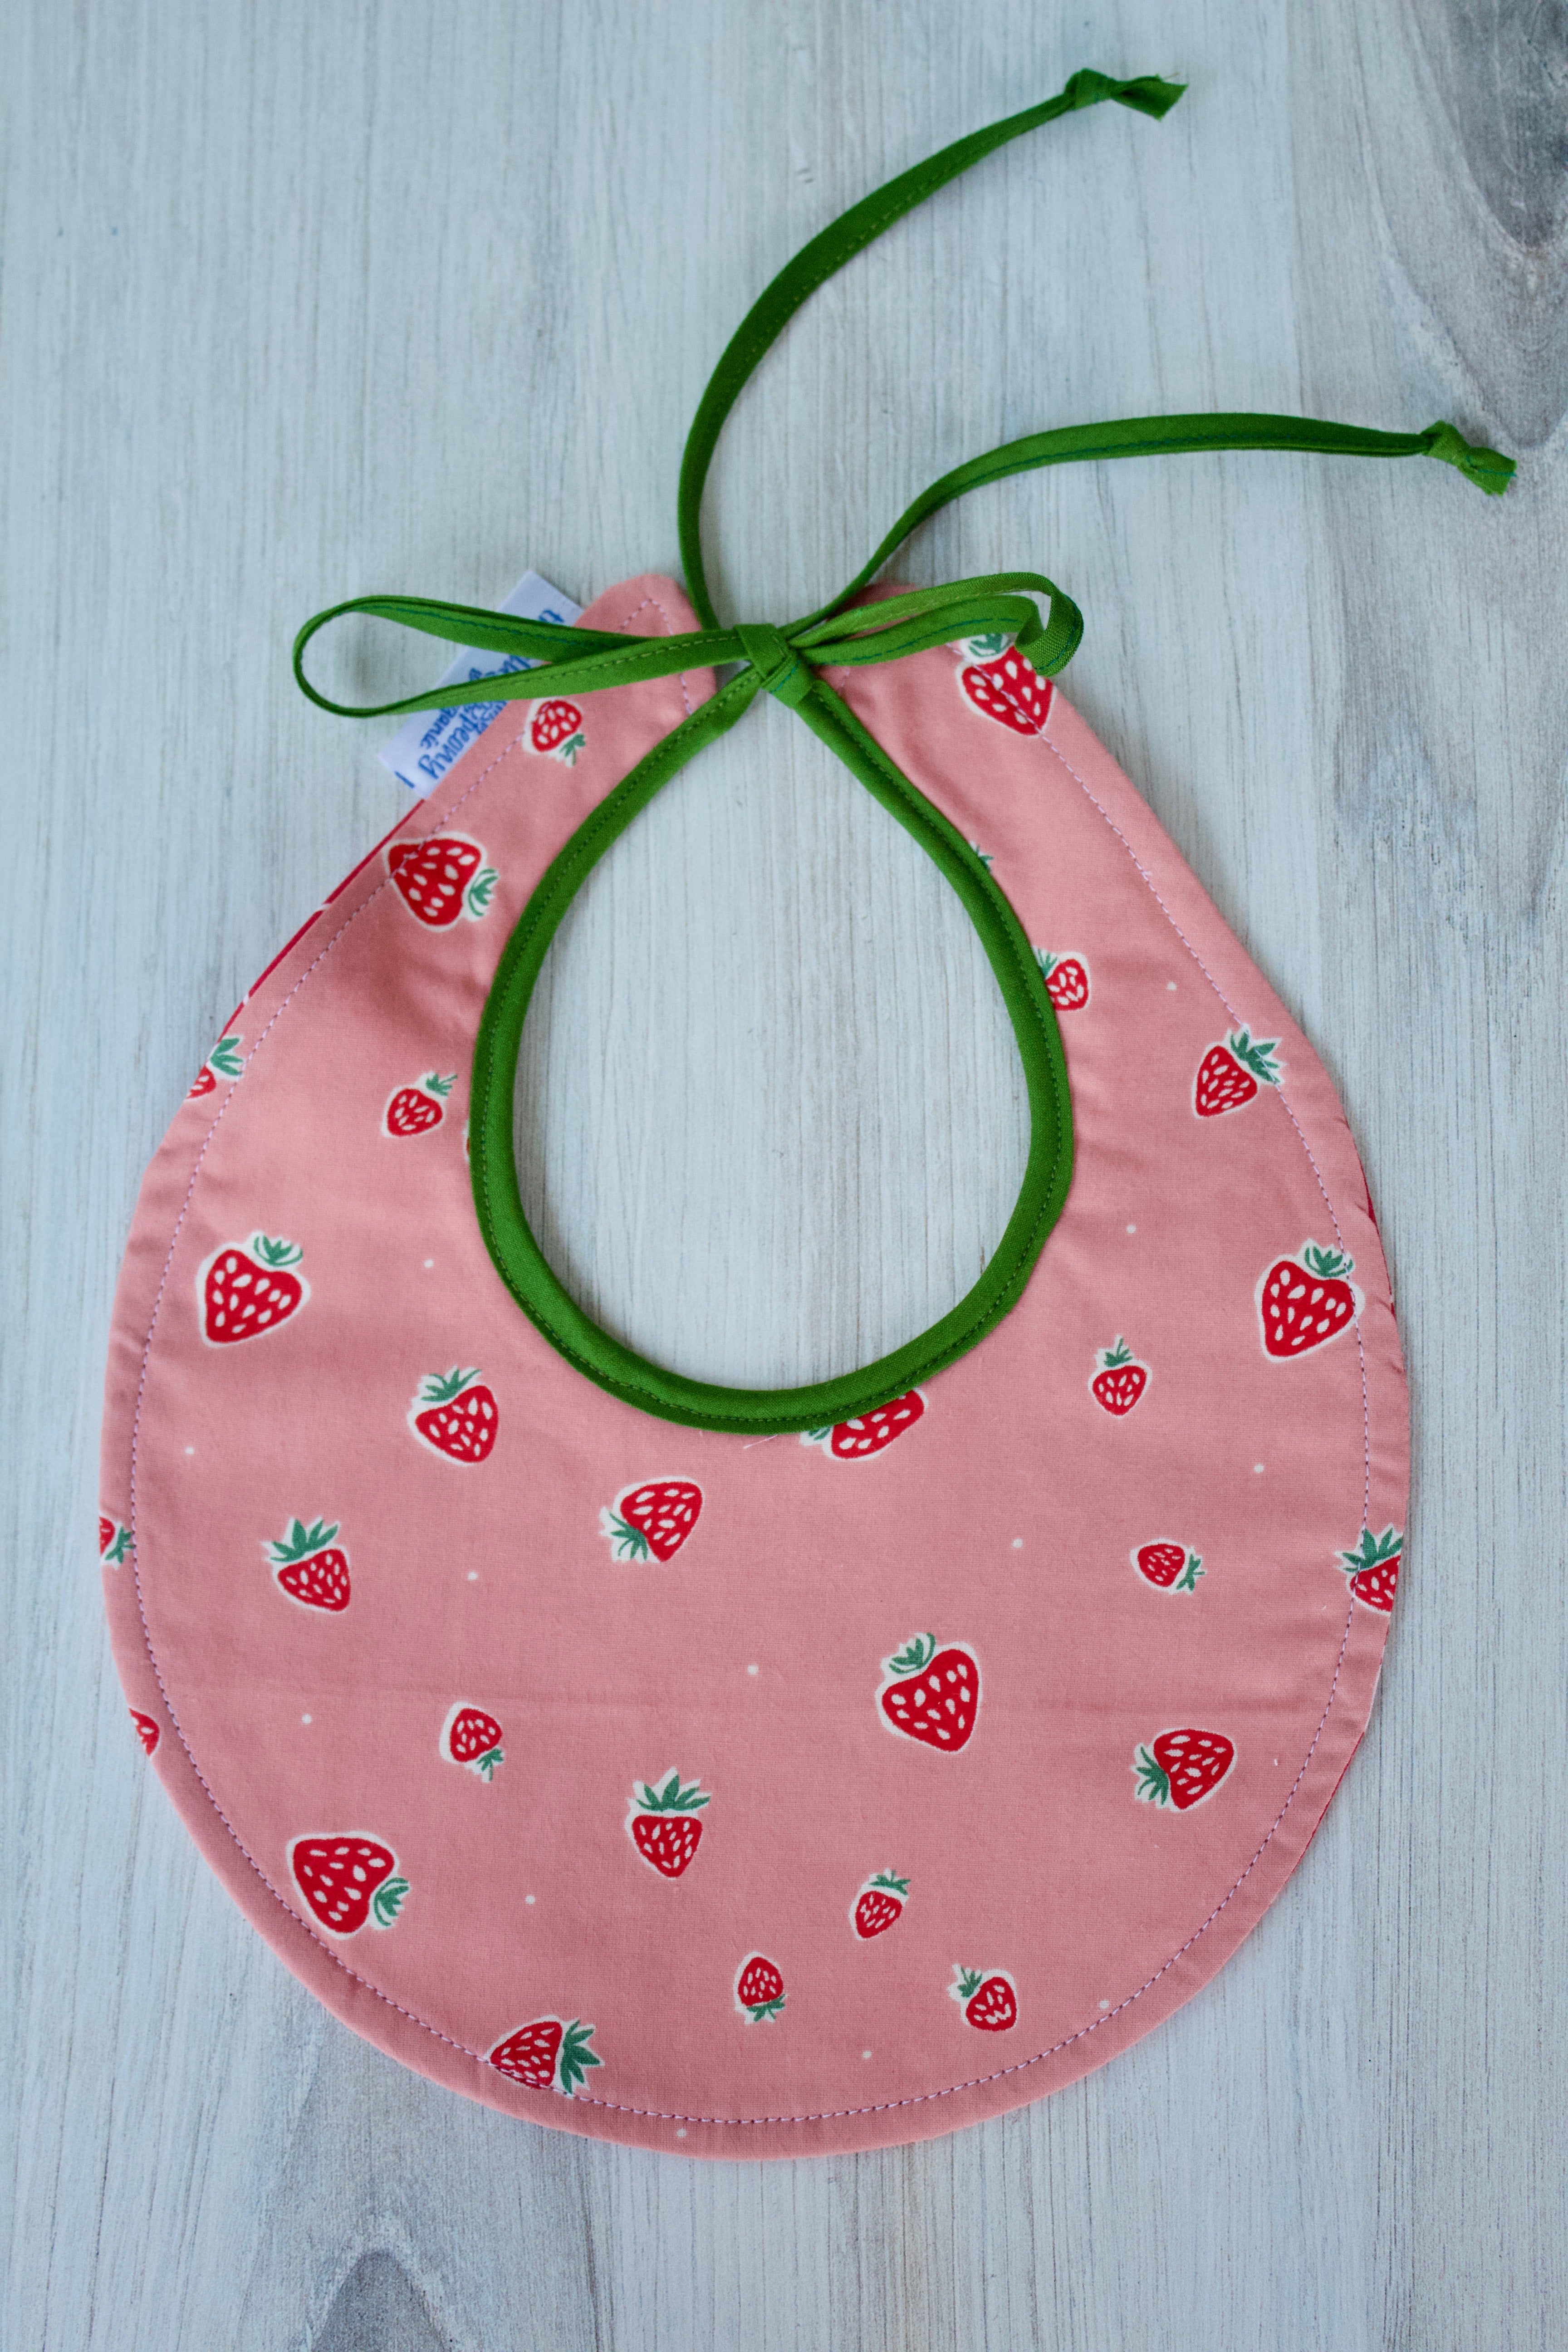 Strawberry (Pink) Bib-The Blue Peony-Category_Bib,Color_Pink,Color_Red,Department_Organic Baby,Material_Organic Cotton,Theme_Food,Theme_Woodland